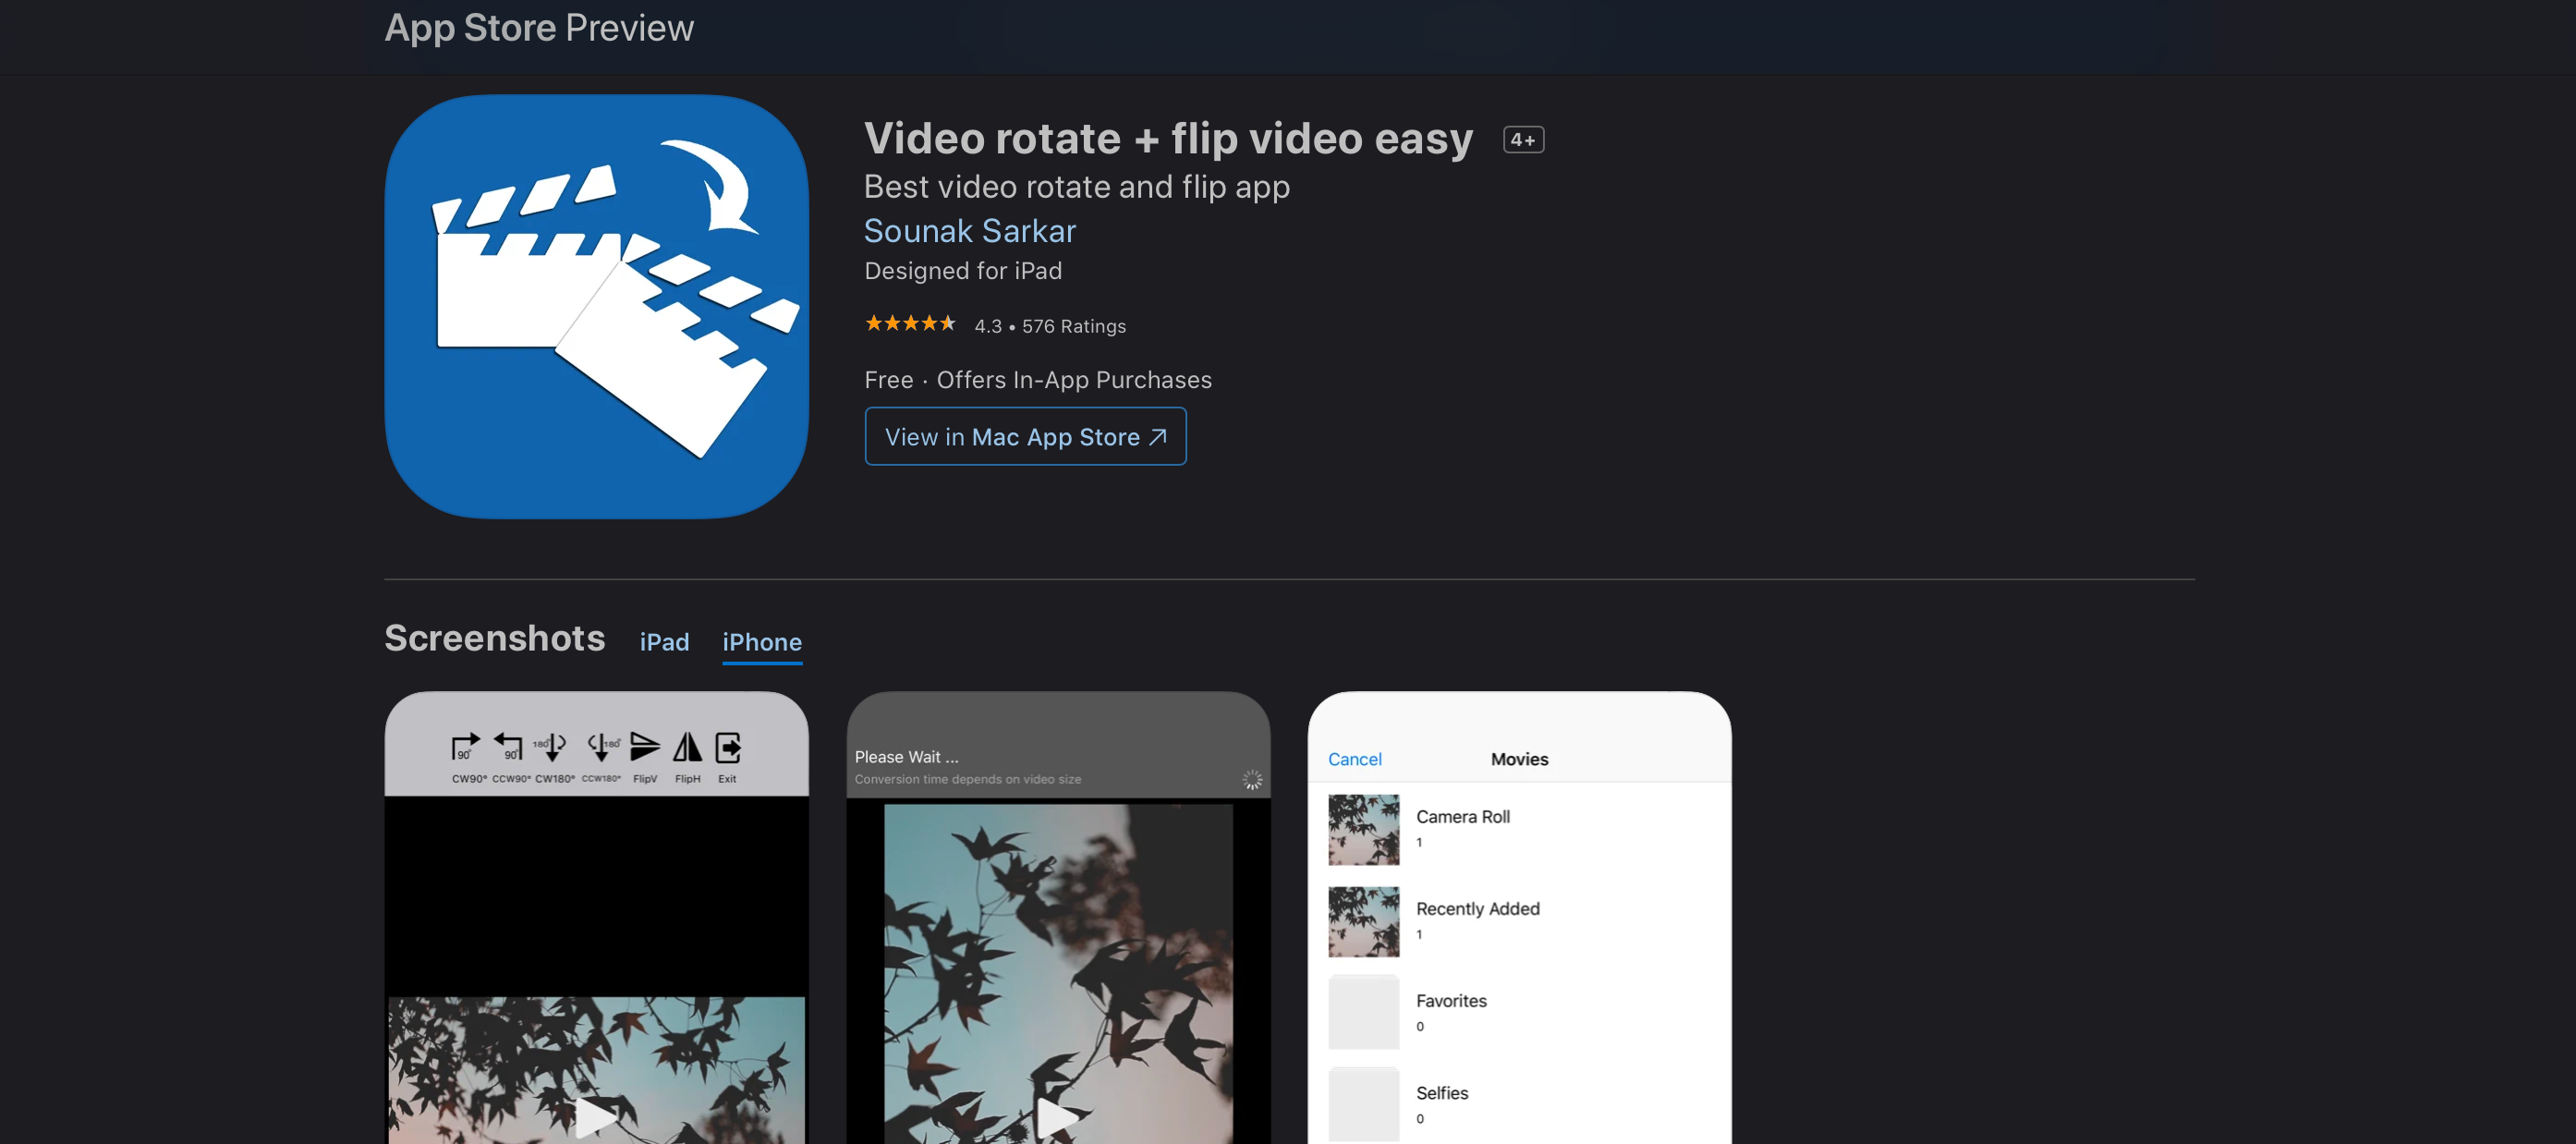 Screenshot of the Video Rotate + Flip app on the App Store.